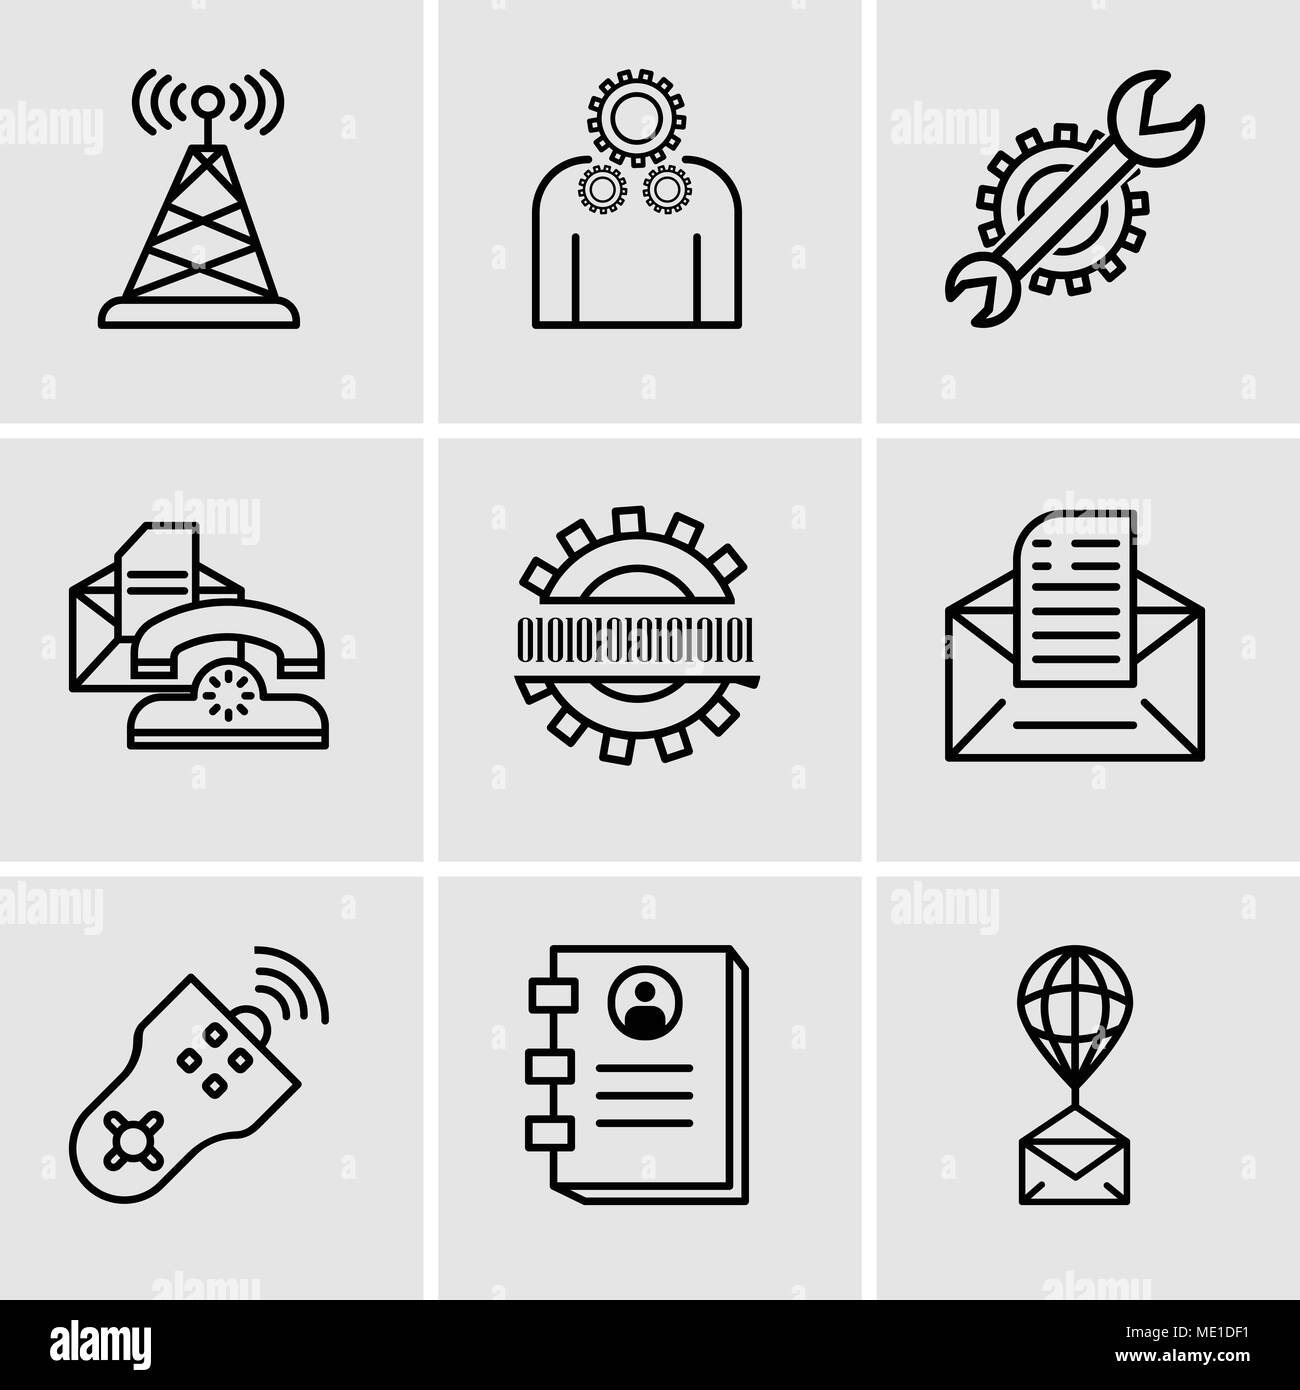 Set Of 9 simple editable icons such as Air balloon, Contact book, Remote control, Email, Binary code, Telephone, Settings, Settings, Antenna, can be u Stock Vector